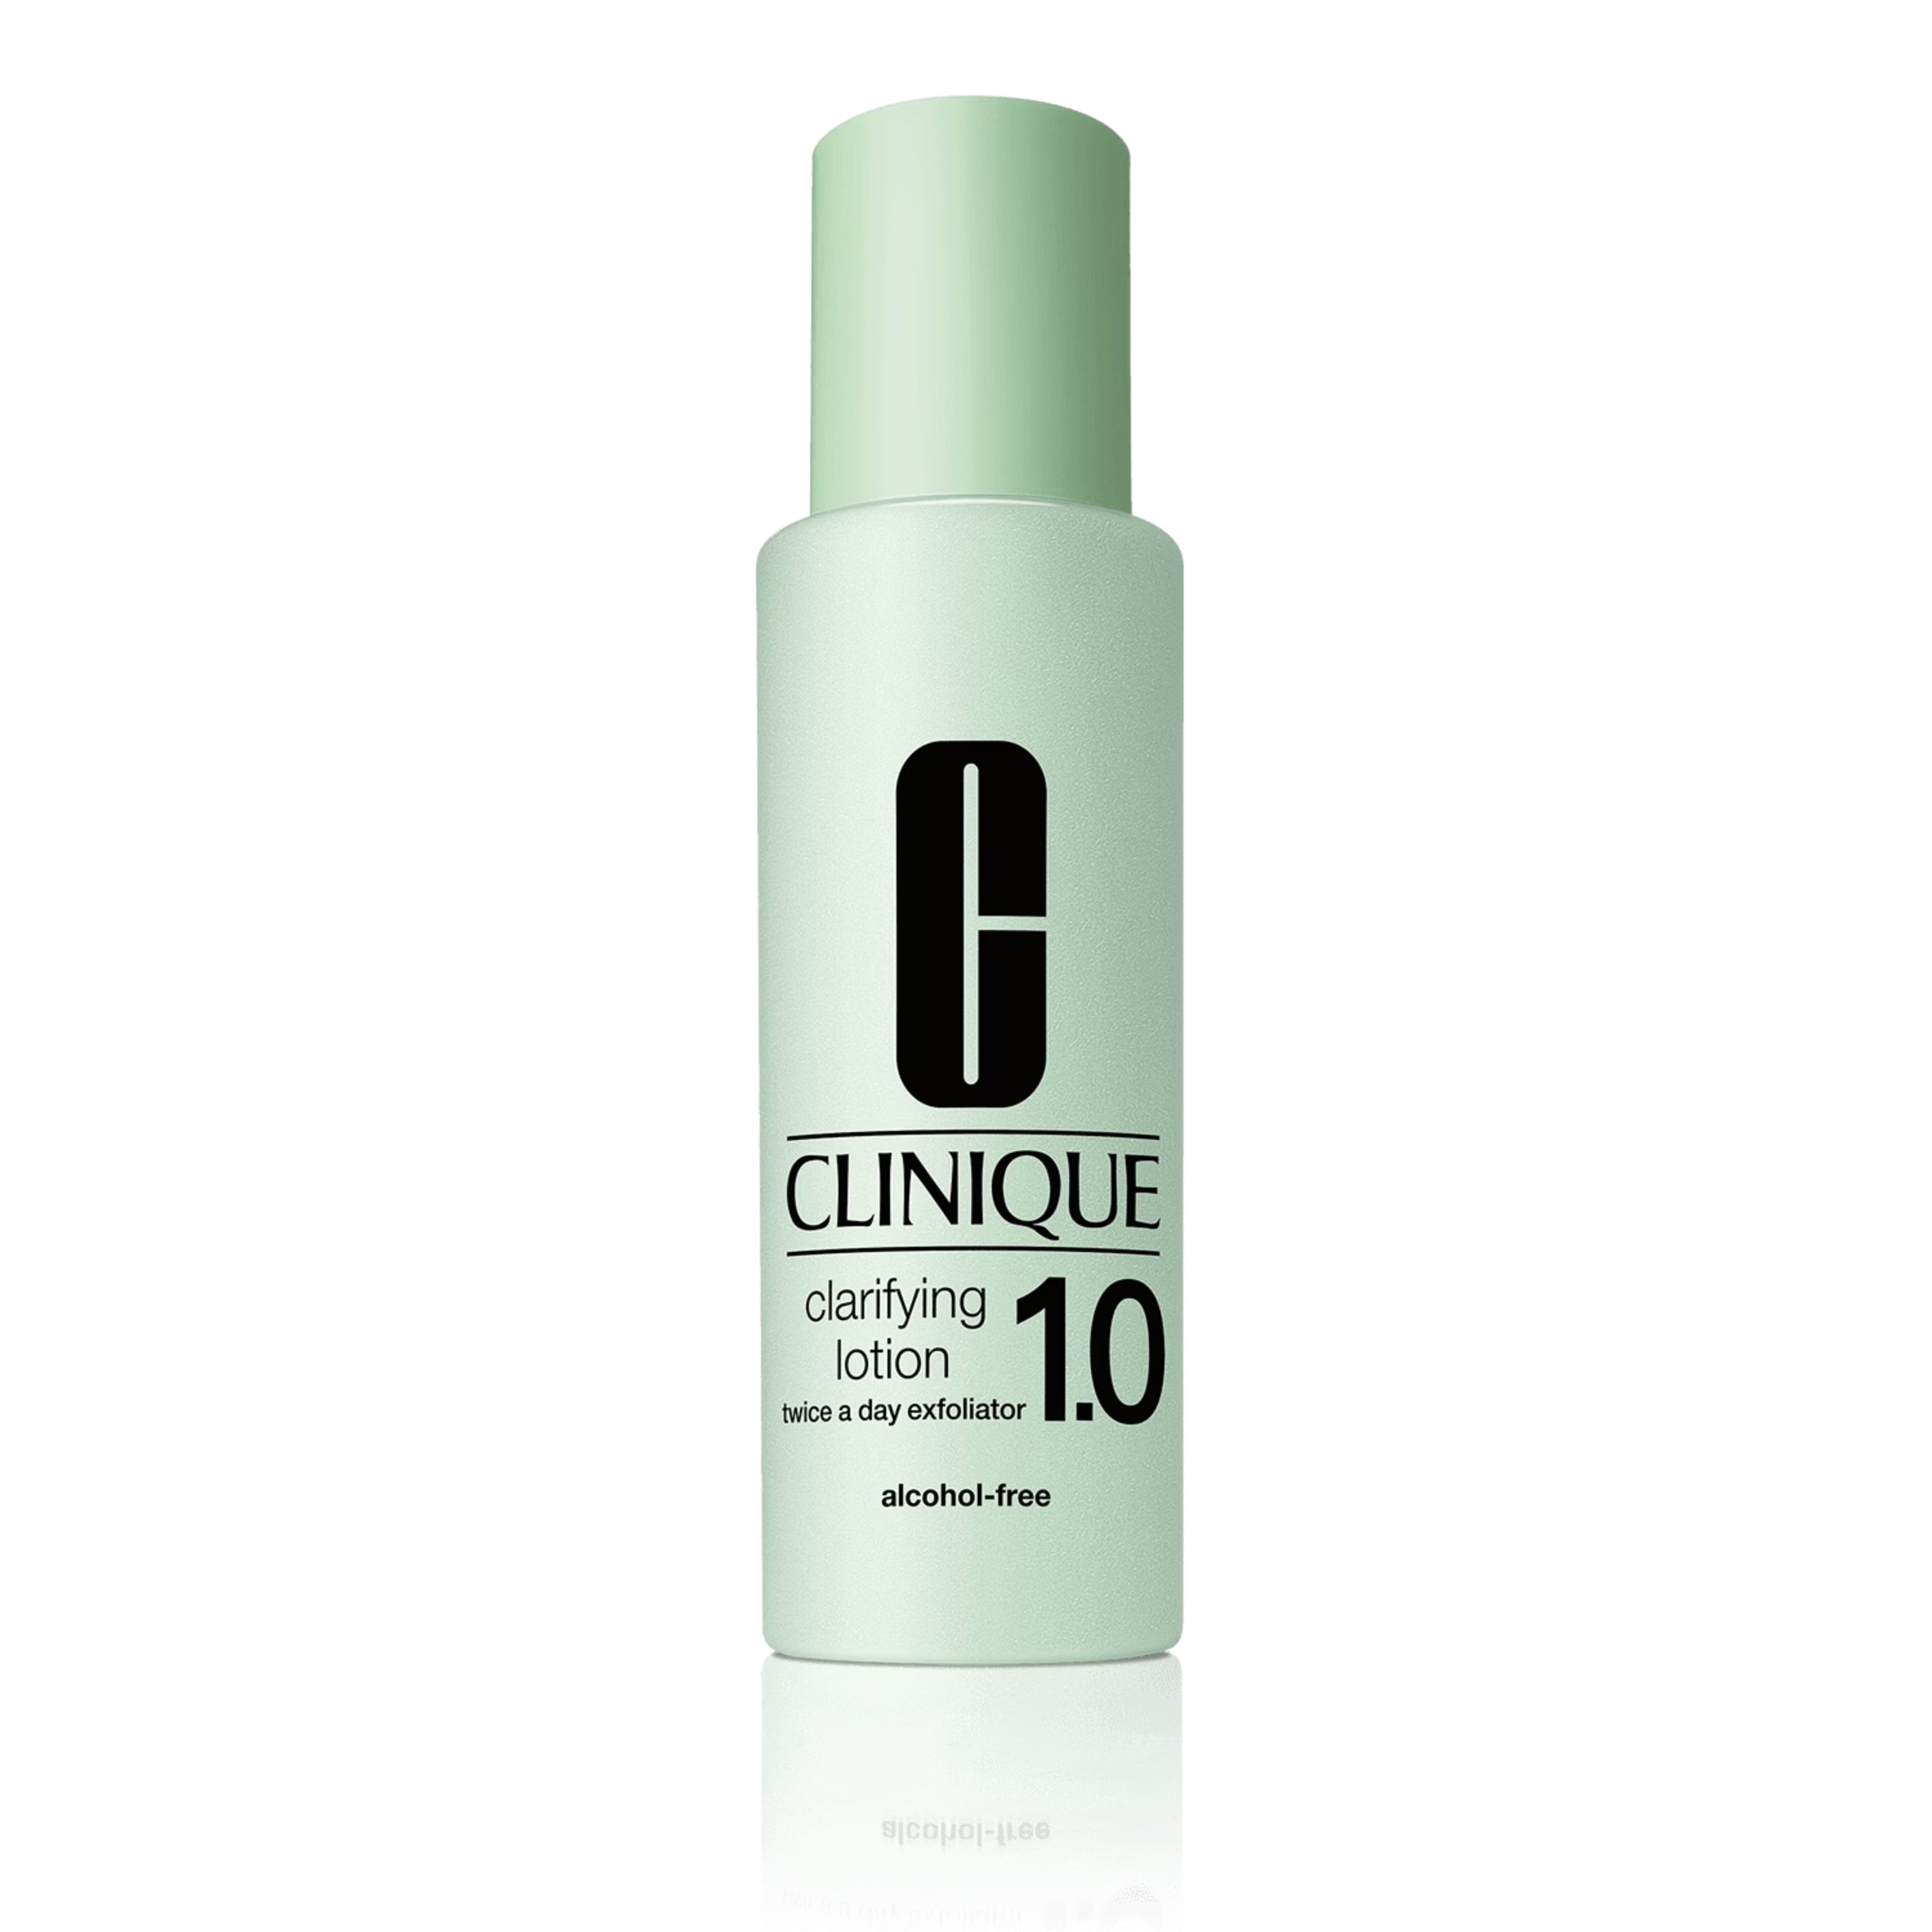 CLINIQUE Clarifying Lotion 1.0 Twice A Day Exfoliator 200ml